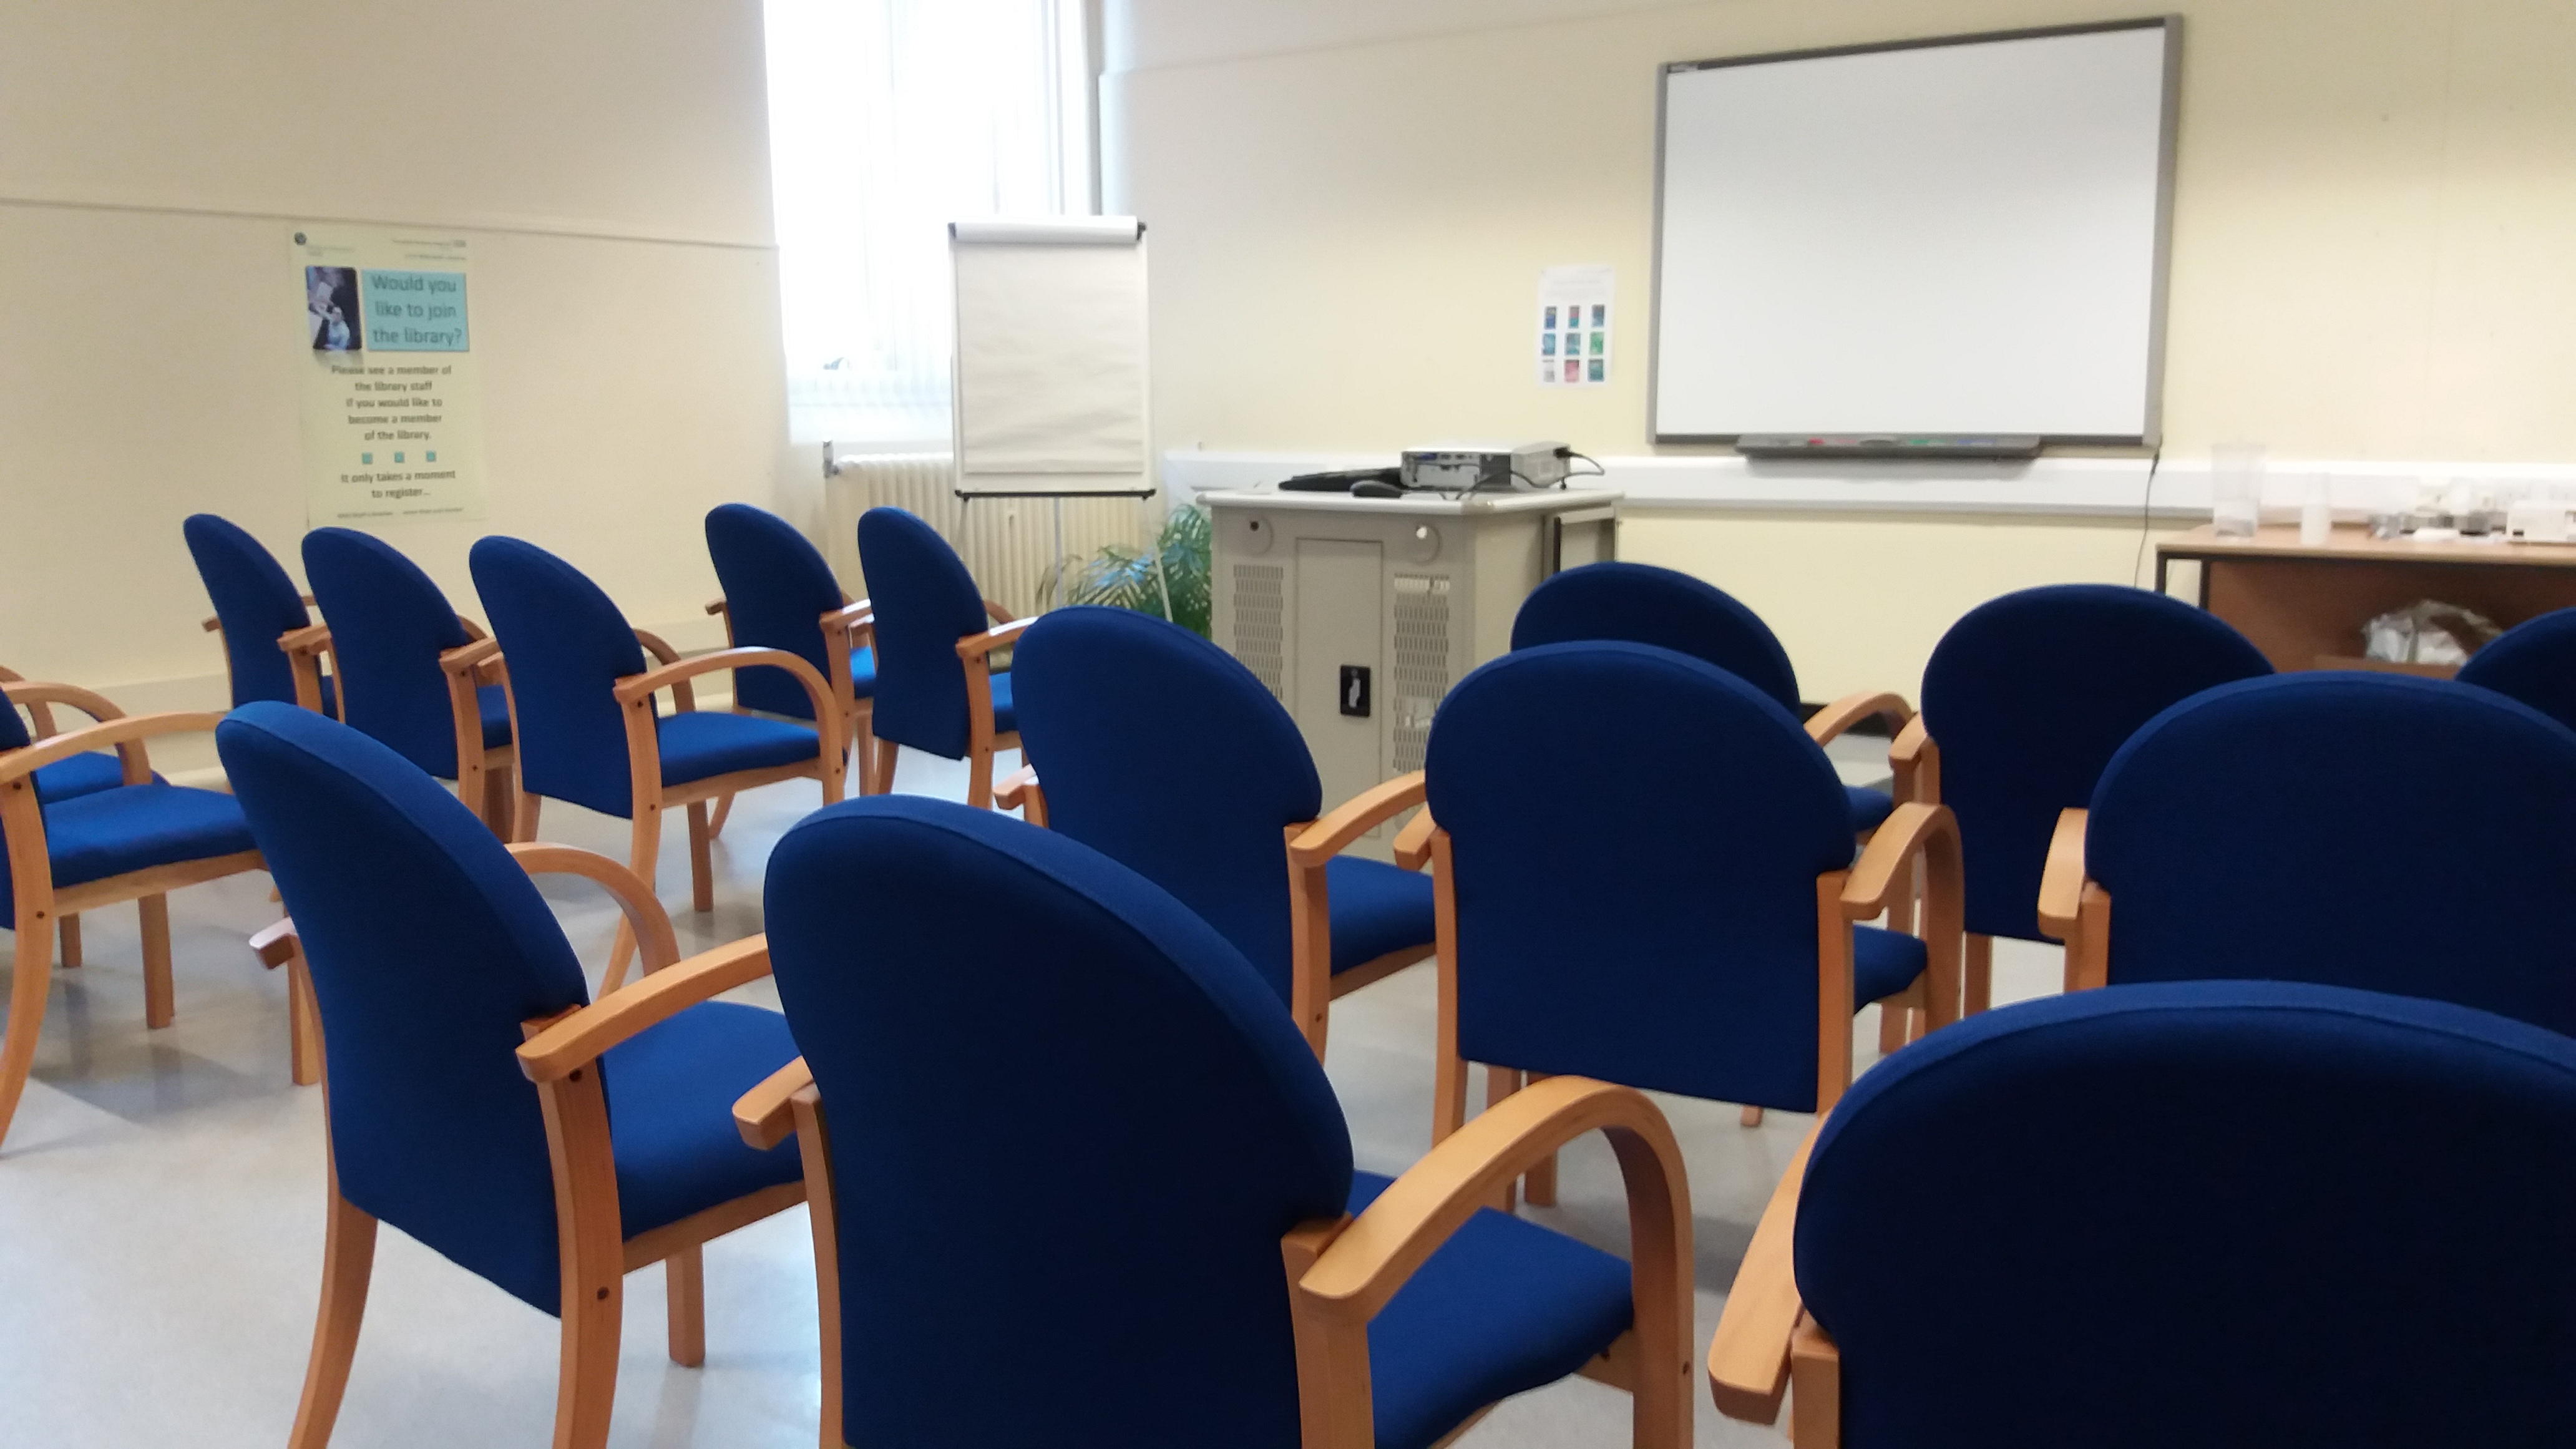 Training room with chairs in rows facing a white board.